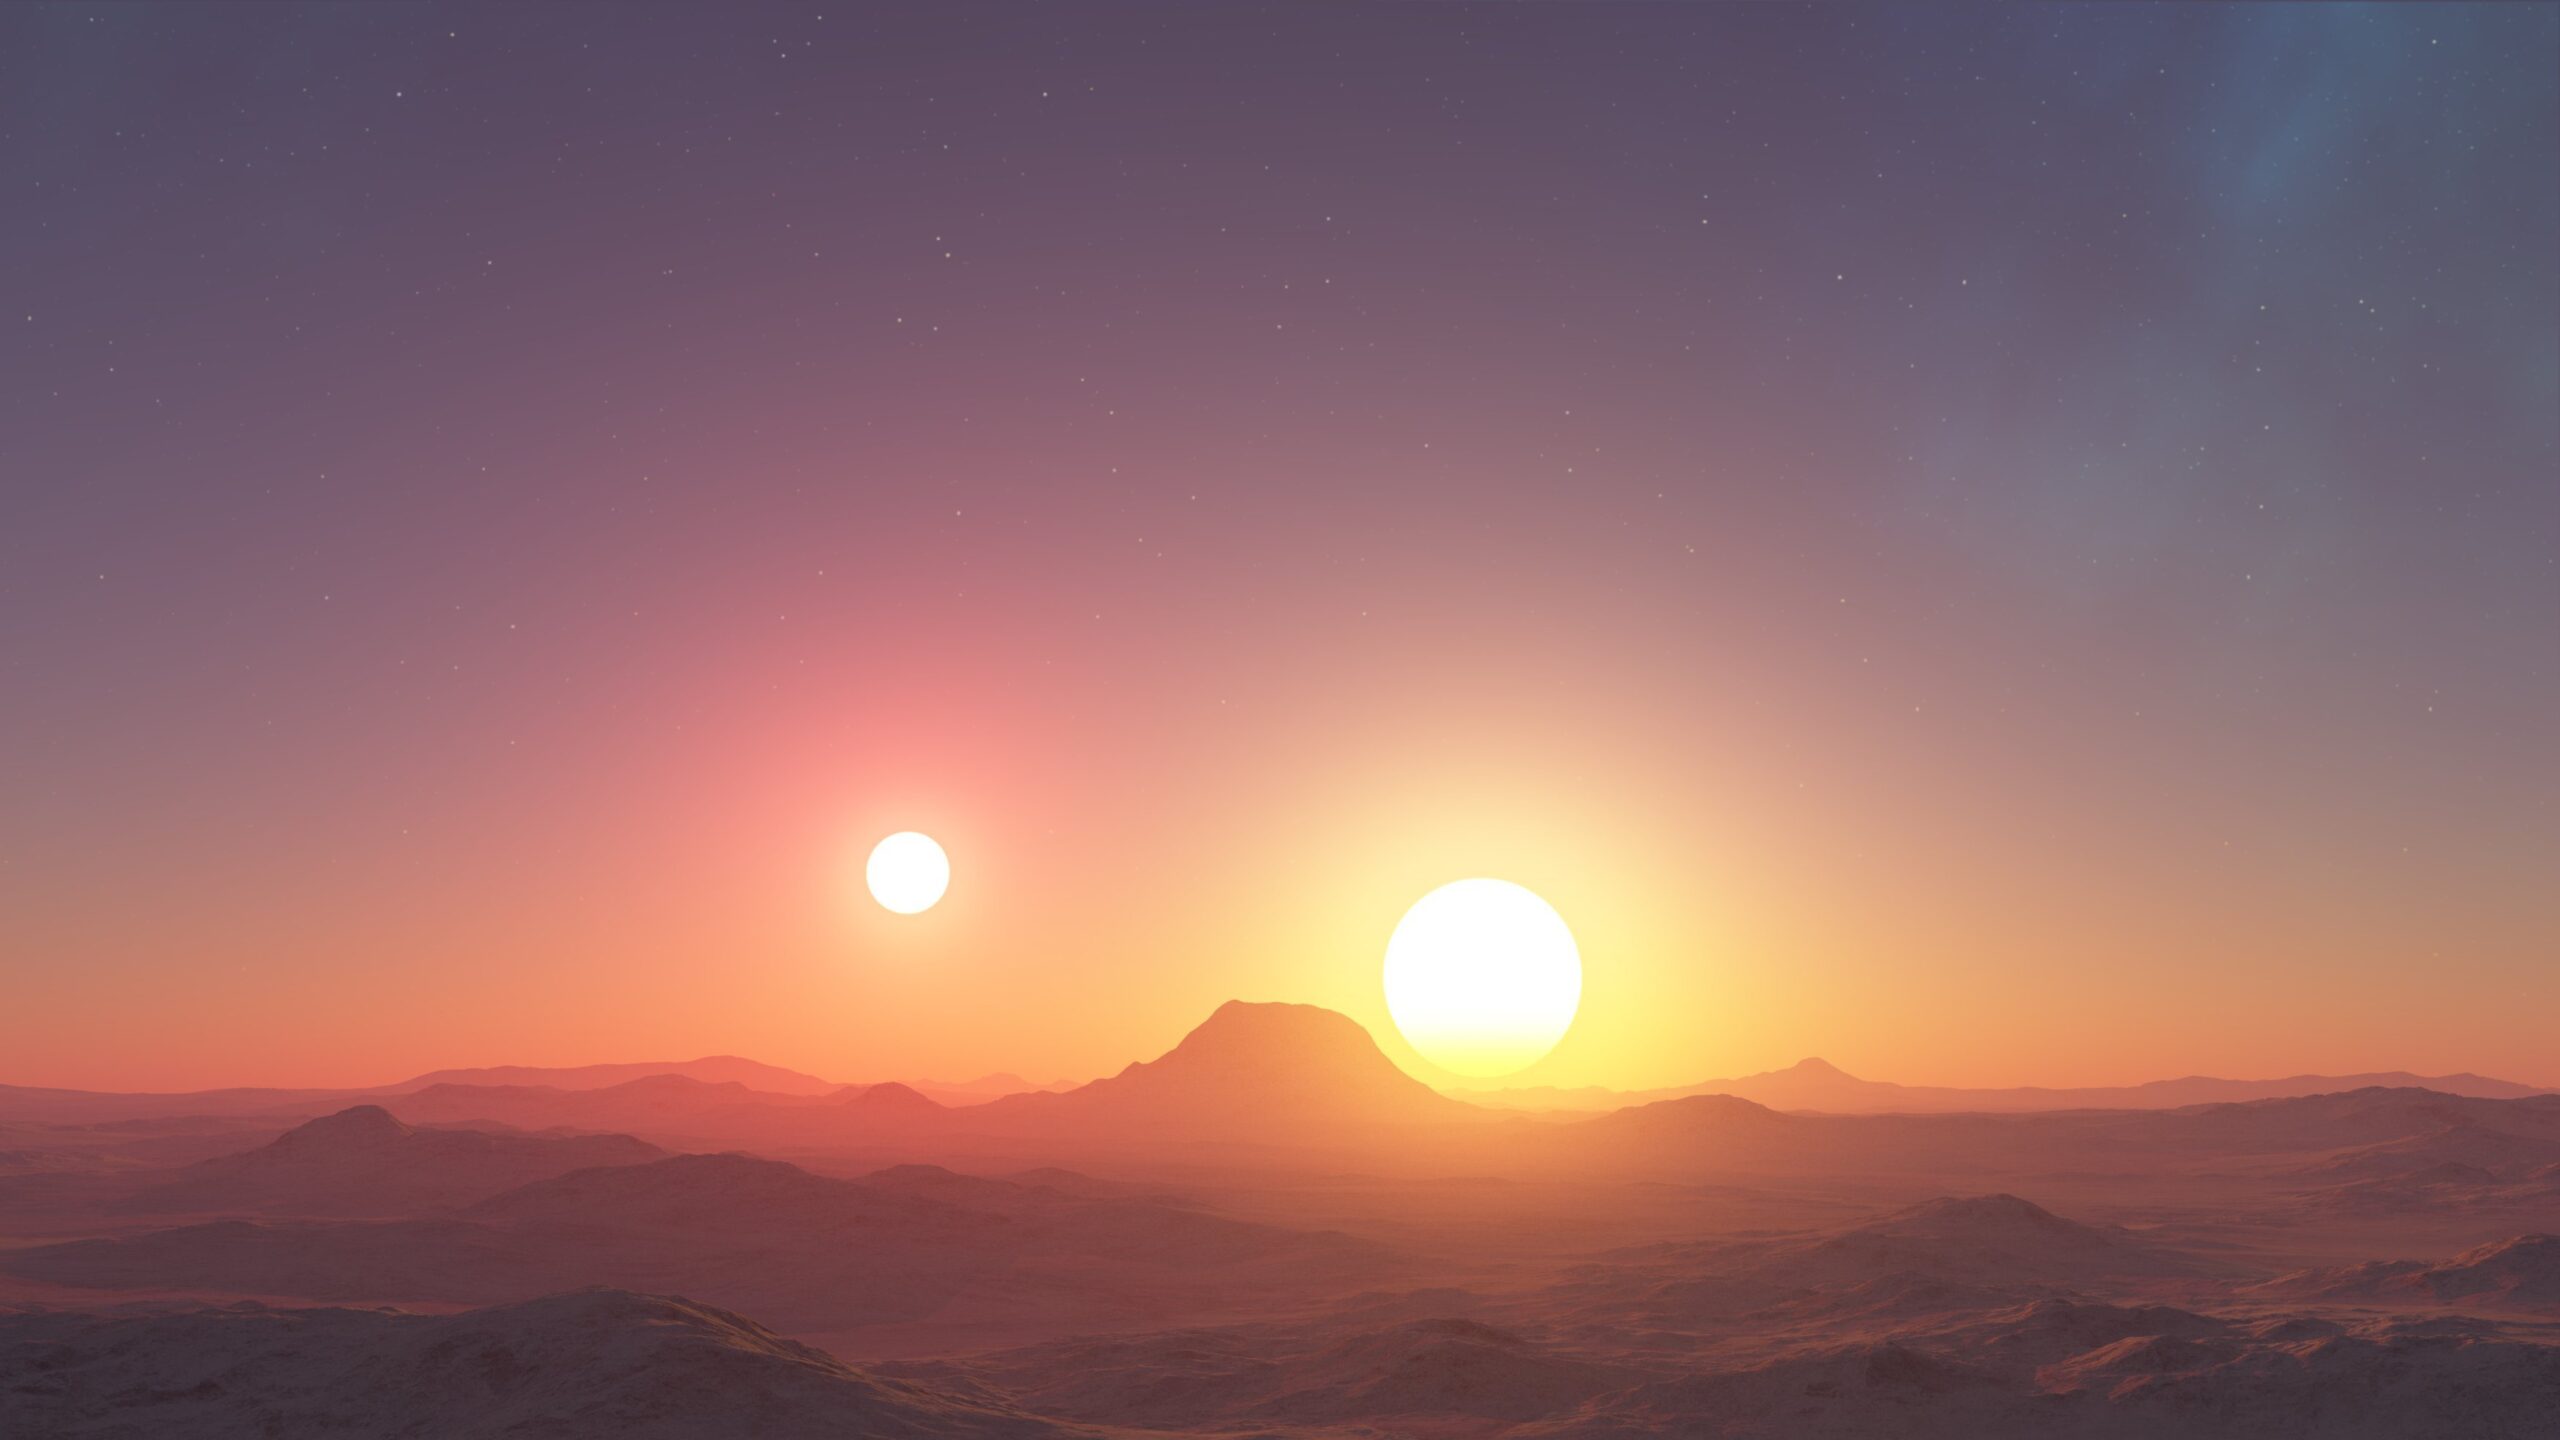 Scientists search for habitable planets with two Suns